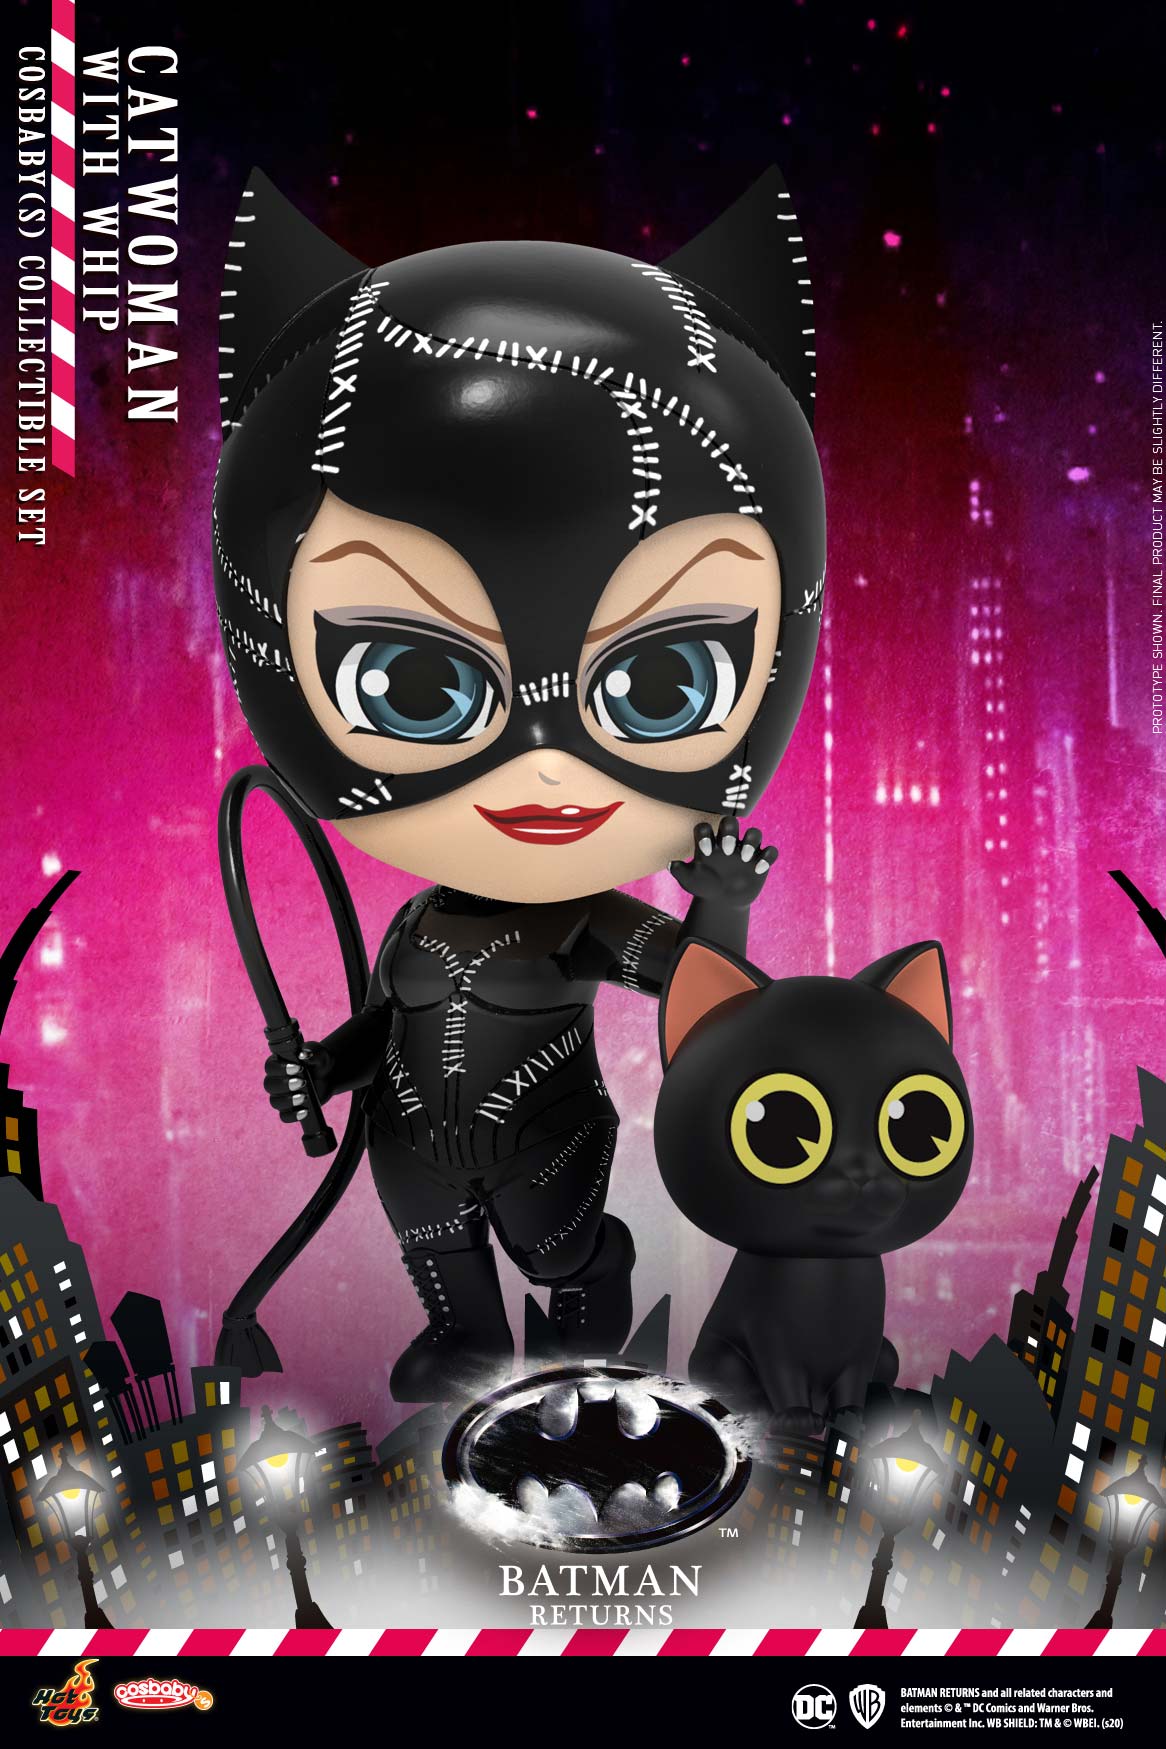 Batman-Returns_COSB716_Catwoman-with-whip_V01